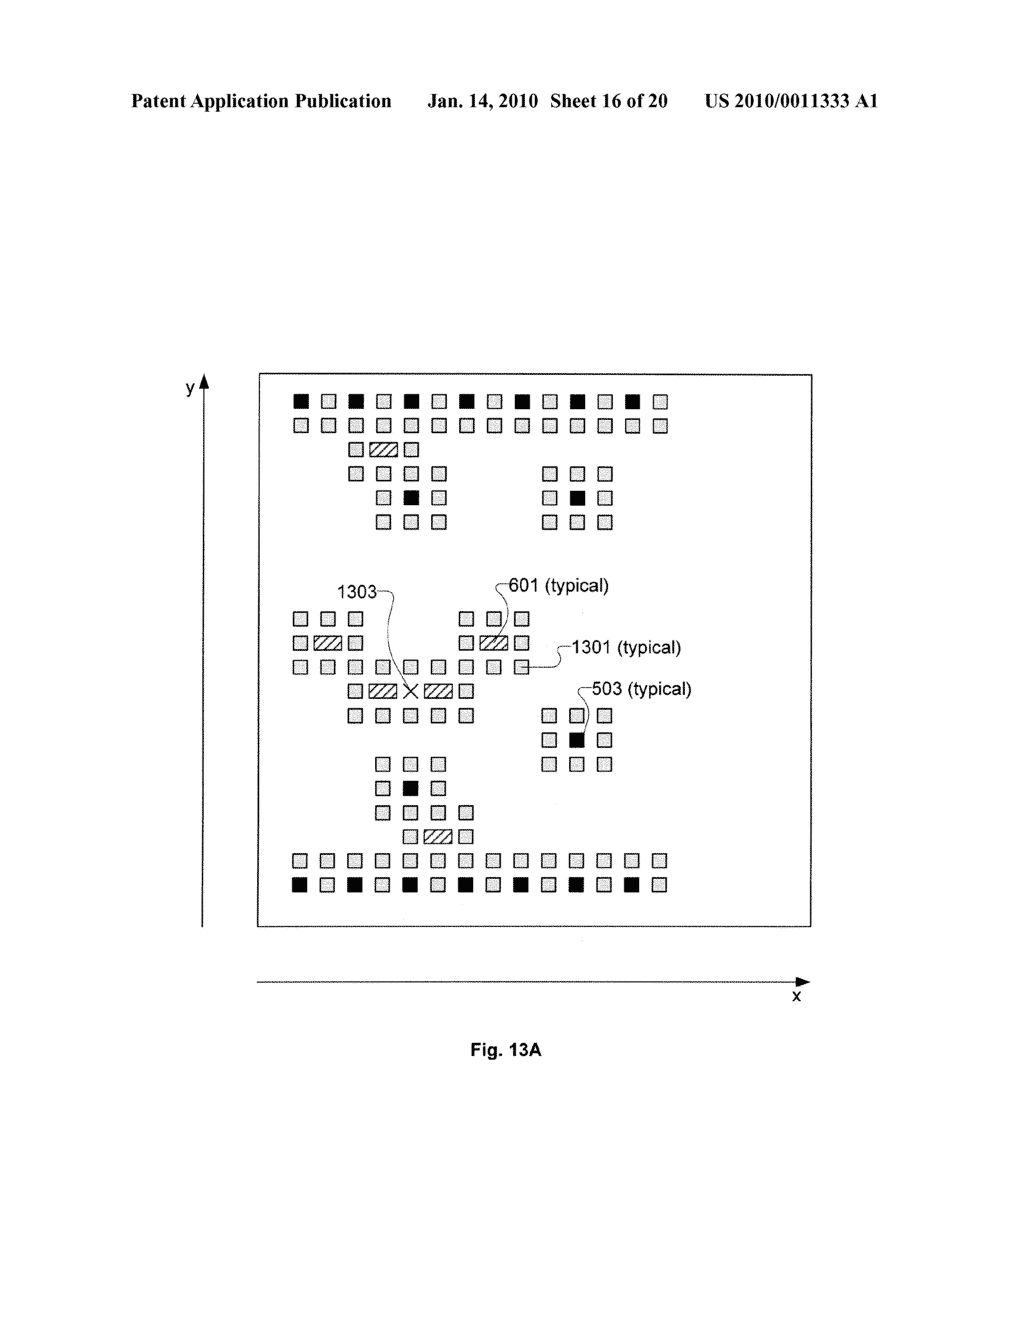 Semiconductor Device Layout Having Restricted Layout Region Including Linear Shaped Gate Electrode Layout Features Defined with Minimum End-to-End Spacing and At Least Eight Transistors - diagram, schematic, and image 17